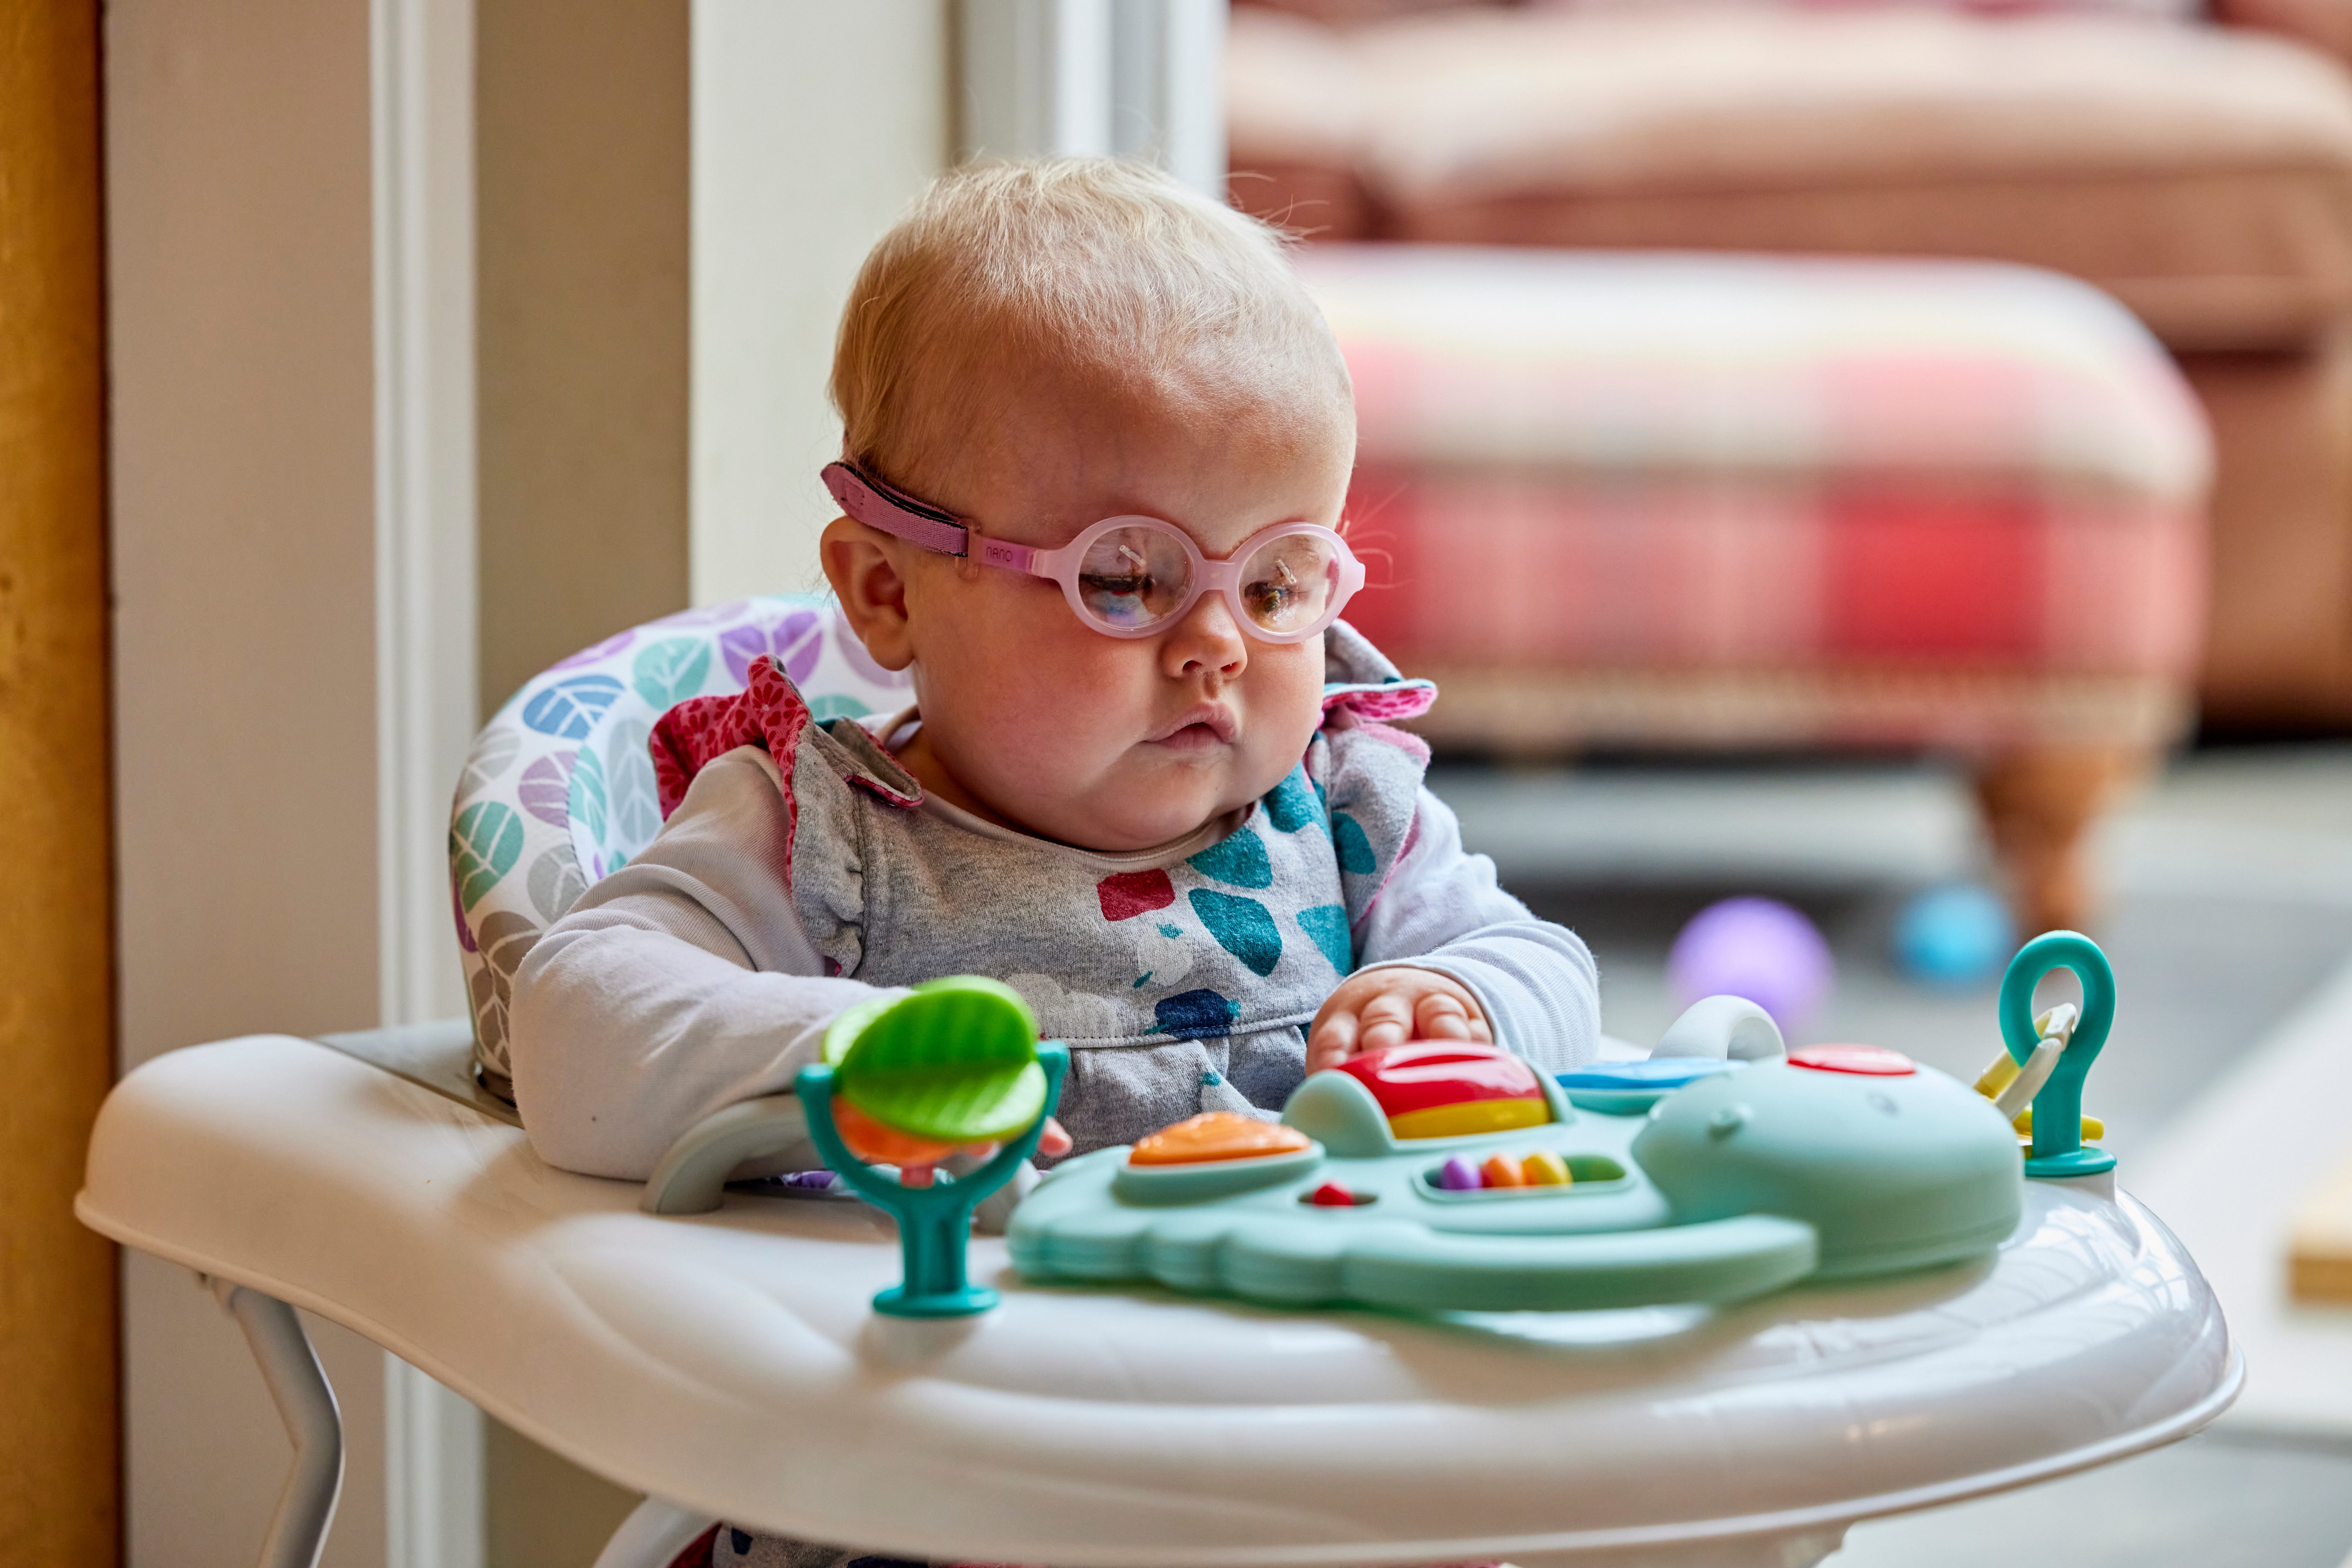 Margot was born with a rare condition called bilateral anophthalmia, which means her eyes and optic nerves failed to develop in the womb (Guide Dogs/PA)